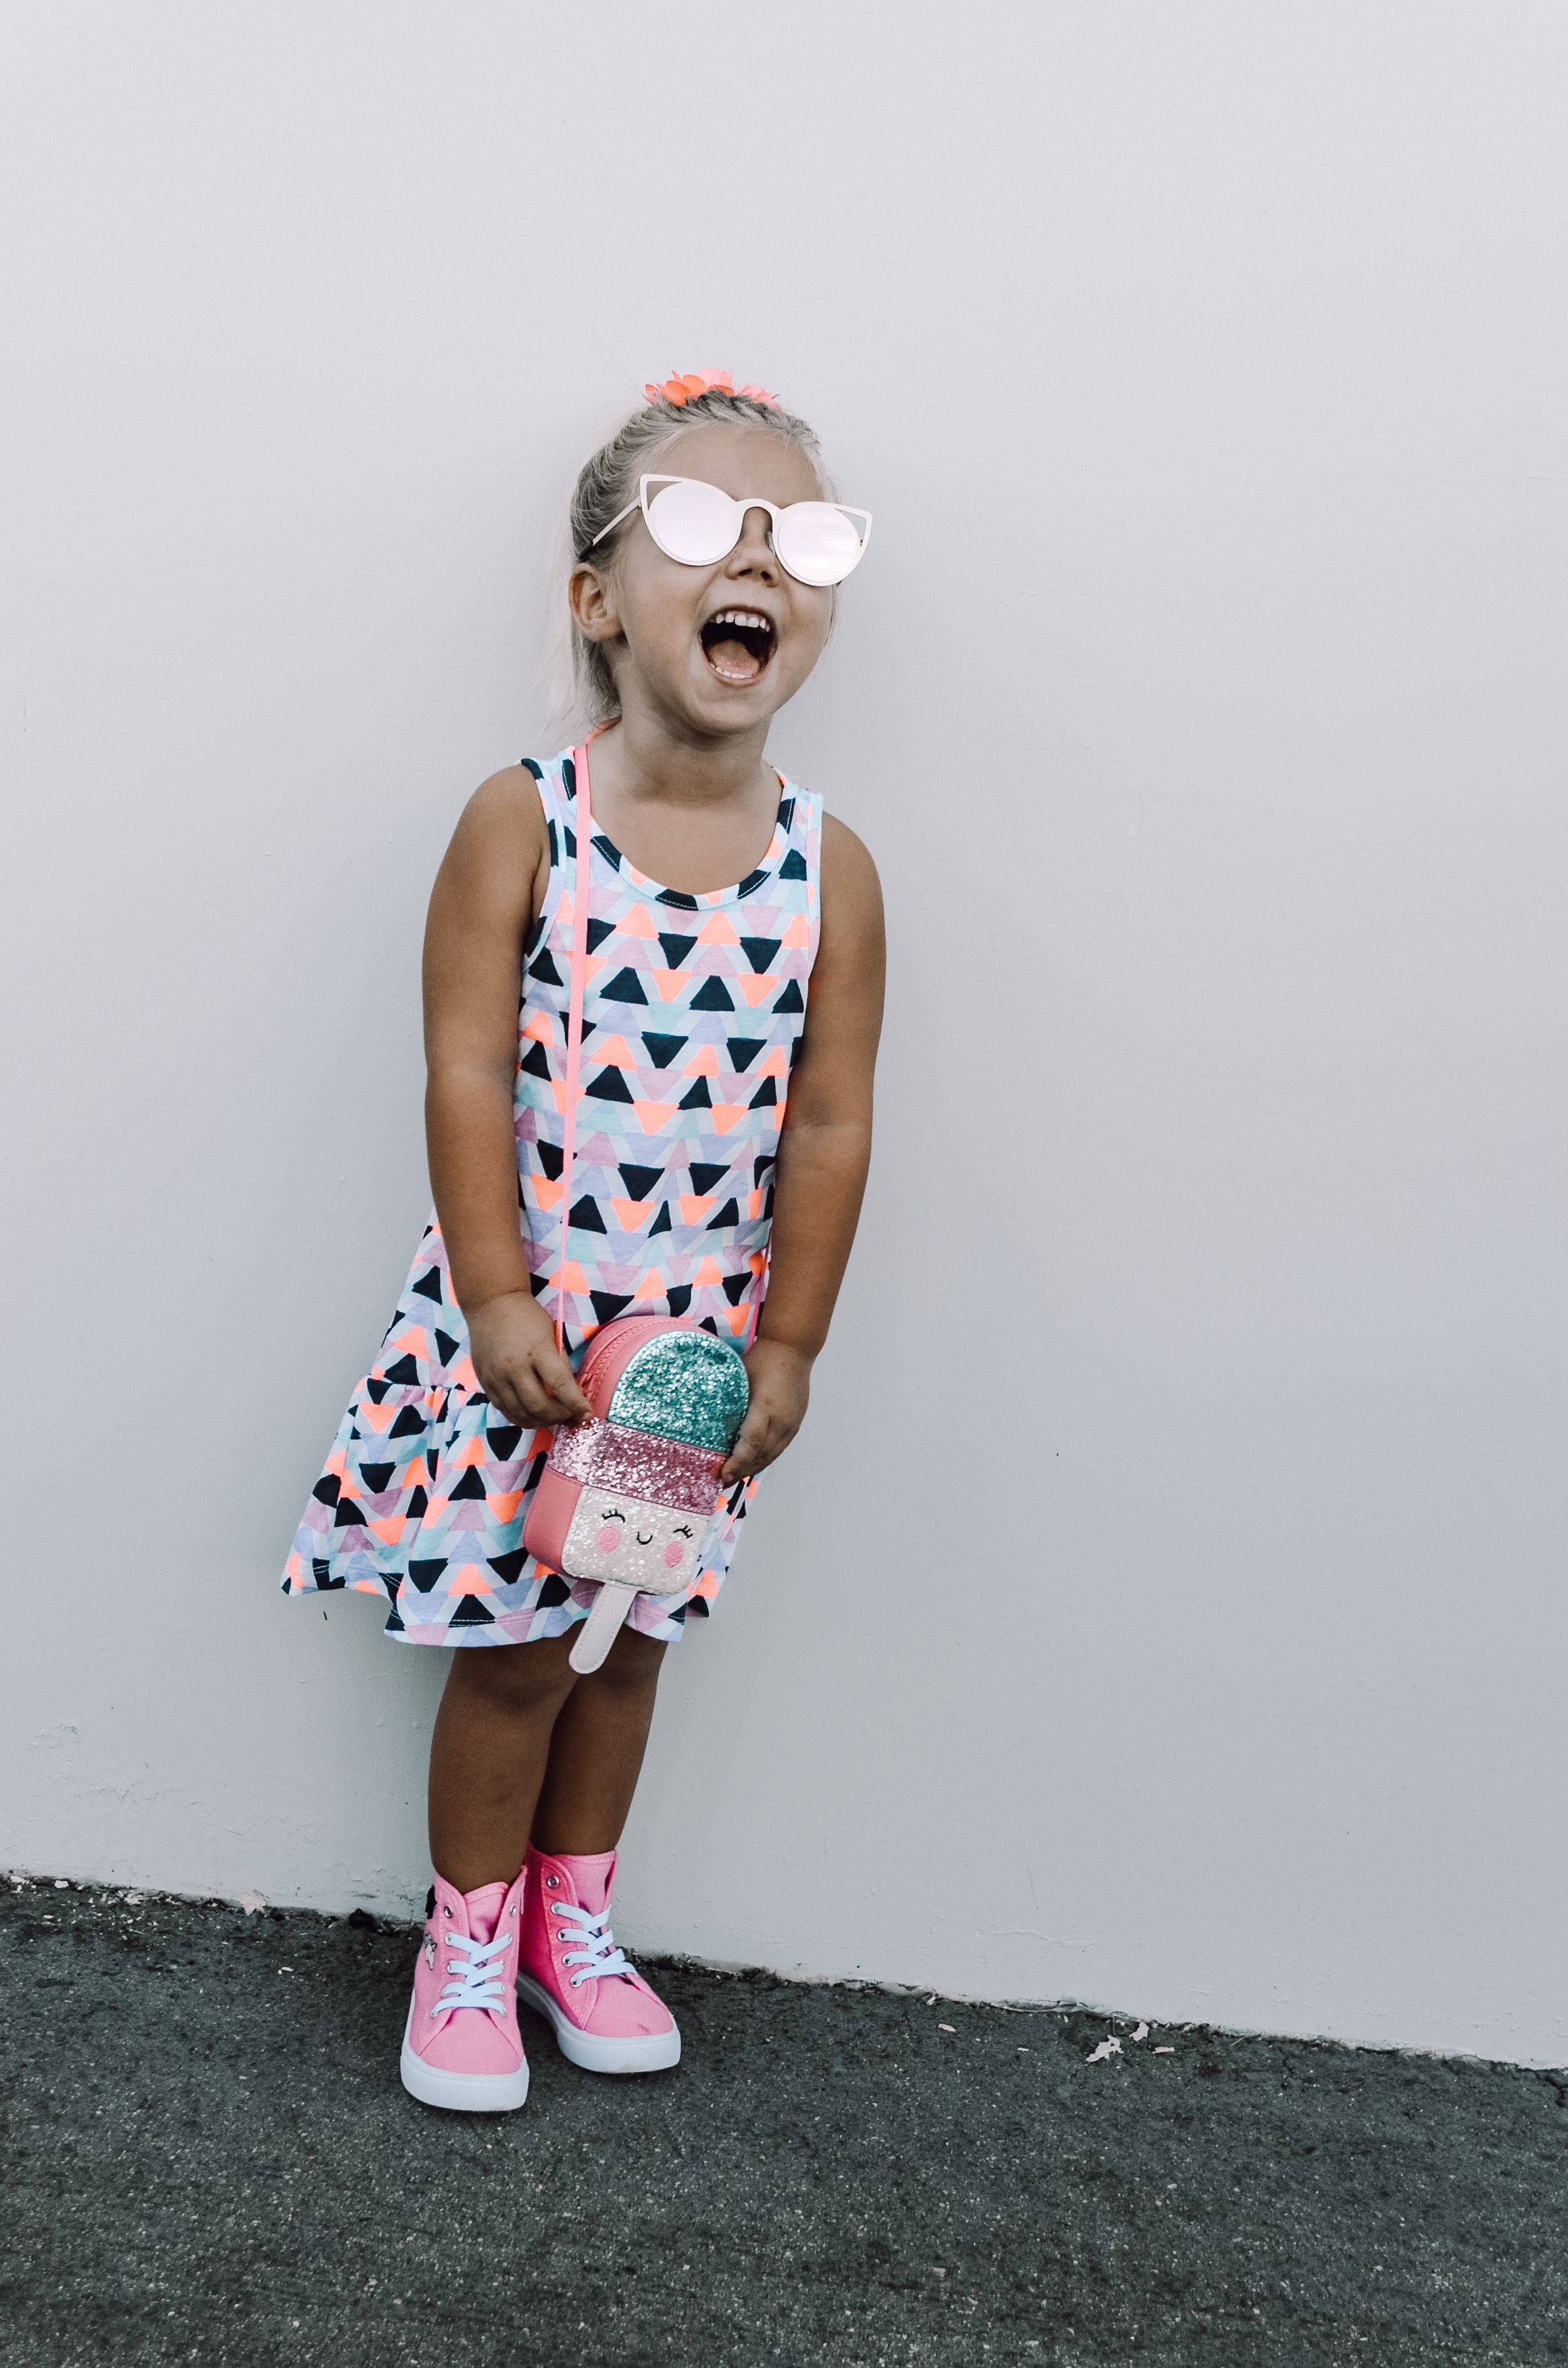 BACK TO SCHOOL WITH FABKIDS- Jaclyn De Leon Style + KID STYLE + HIGH TOPS + SUNGLASSES + KID LIFE + MOM LIFE + GETTING READY FOR SCHOOL + CHILDREN SNEAKERS + POPSICLE PURSE + GEOMETRIC DRESS + KIDS FOR REAL + FALL STYLE + SCHOOL OUTFITS